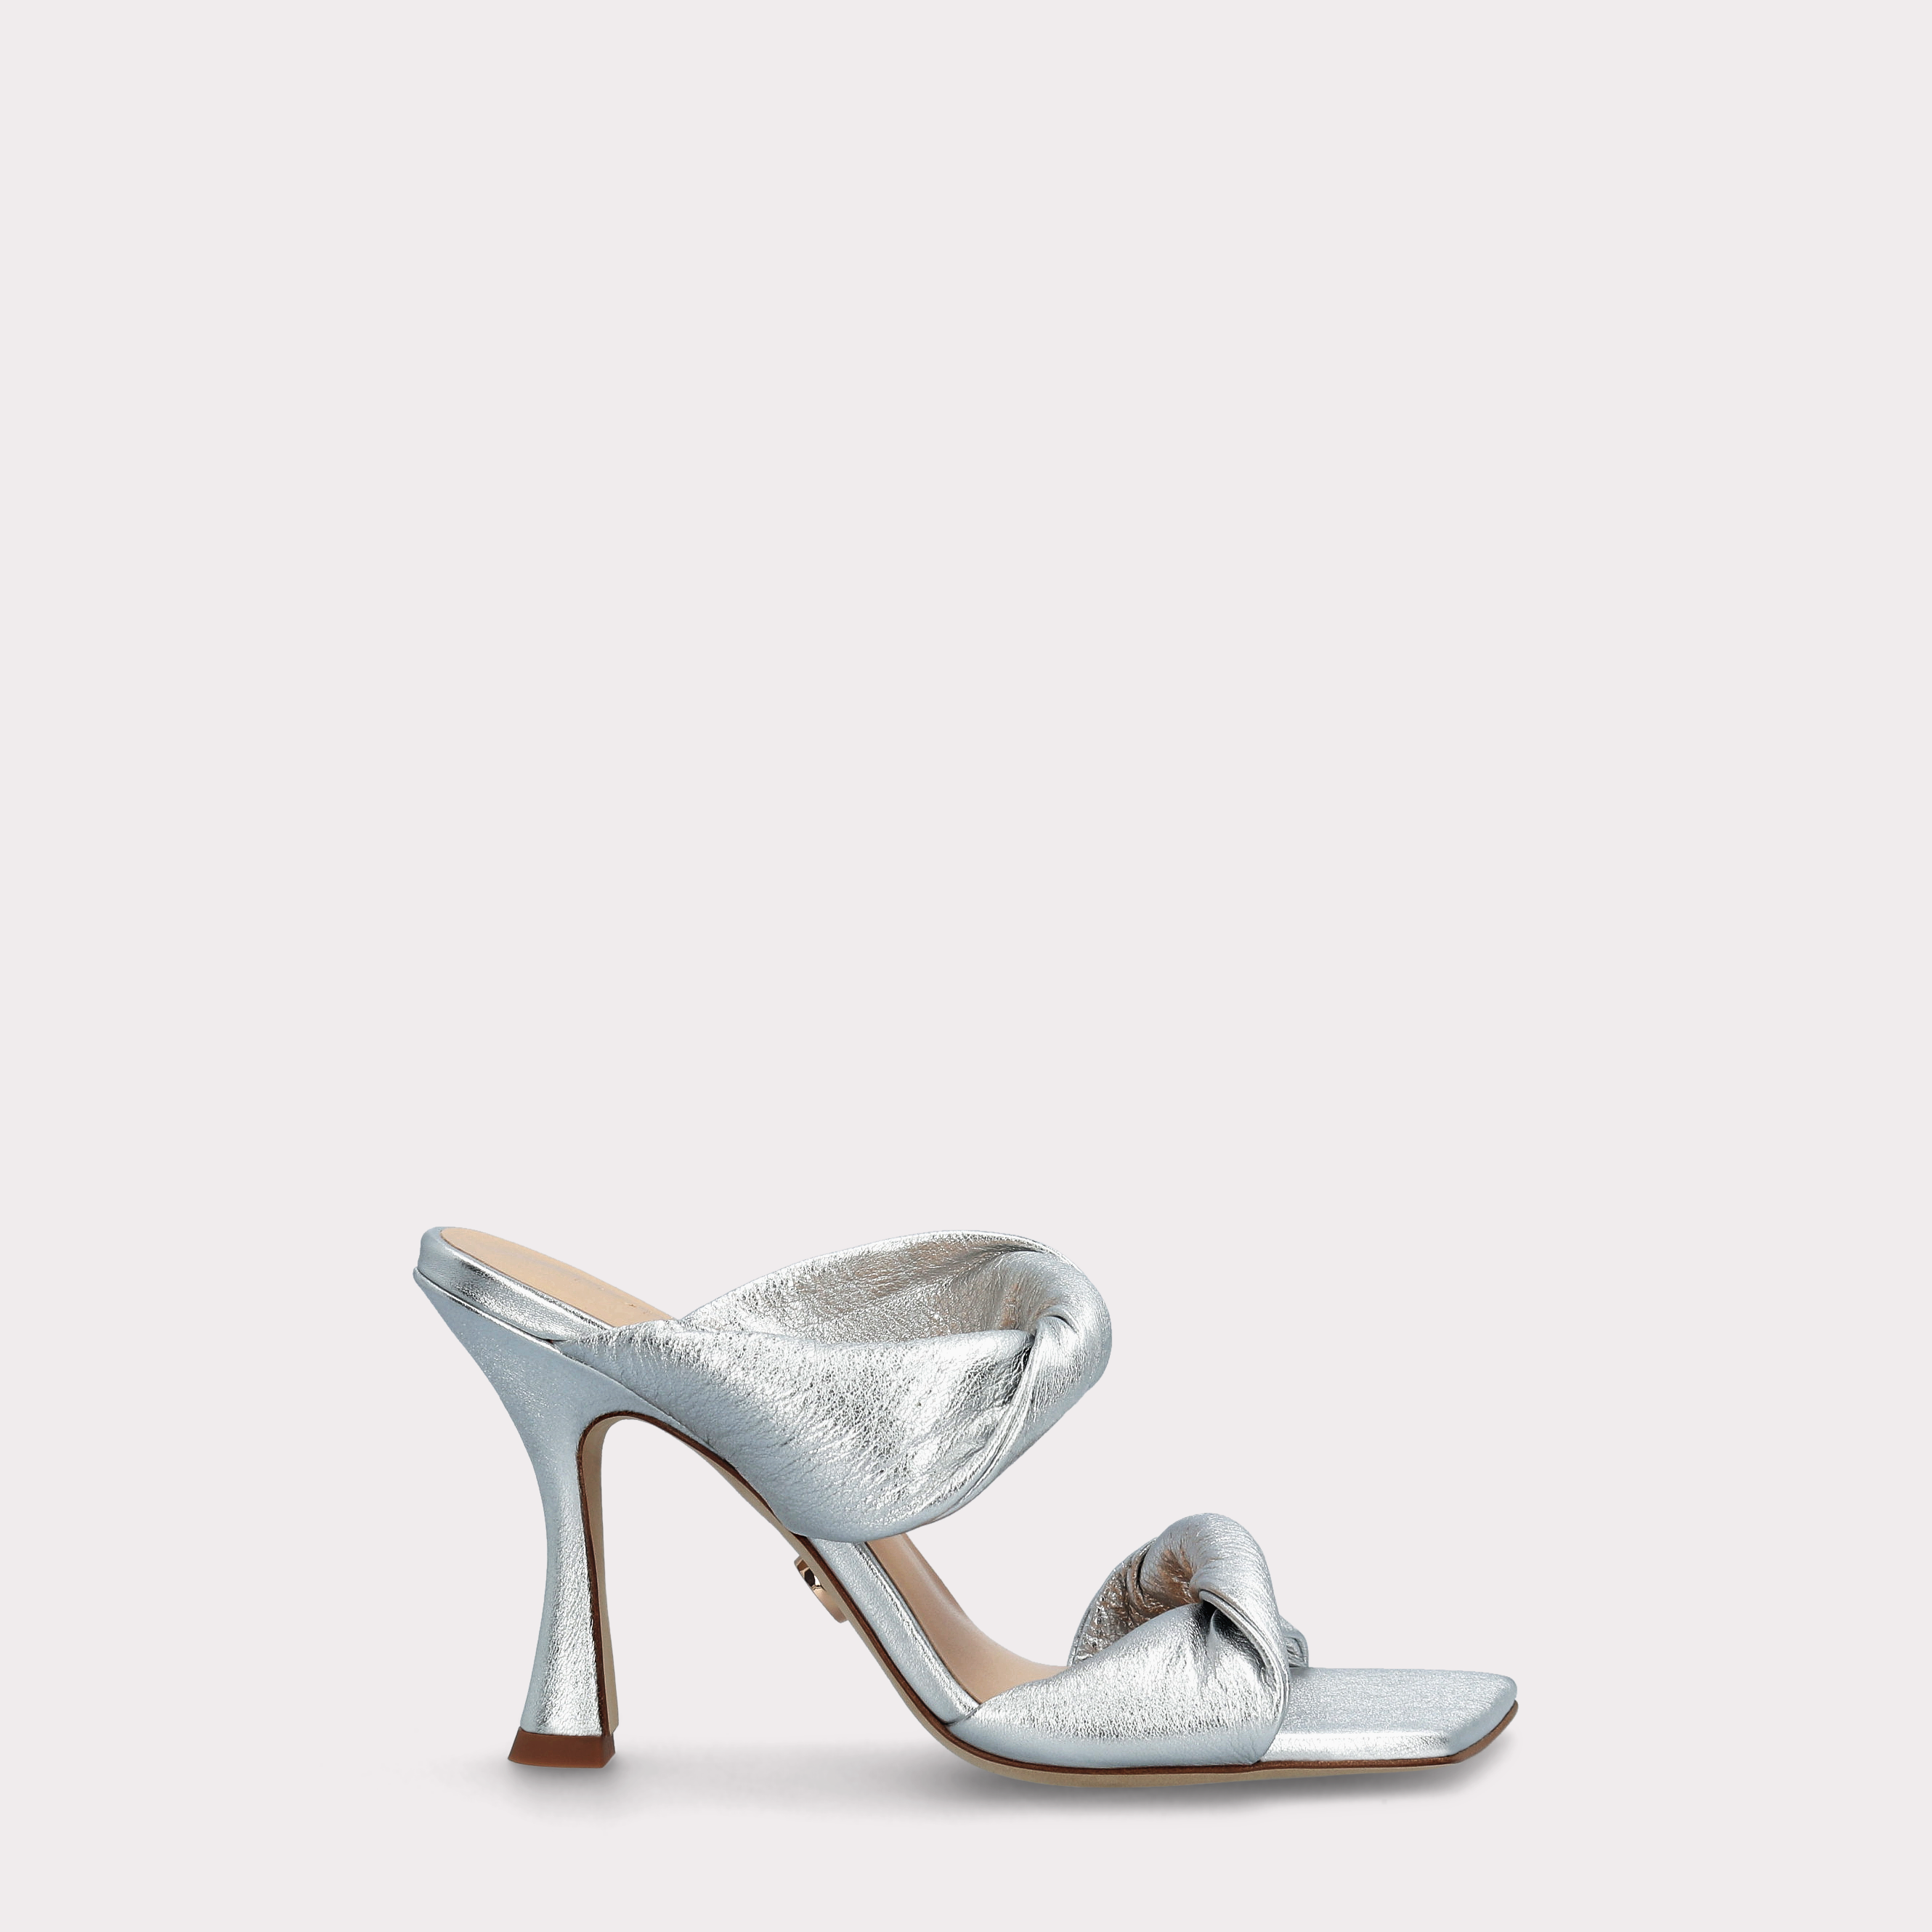 BETTY 30 METAL BUTTER BIANCO LEATHER